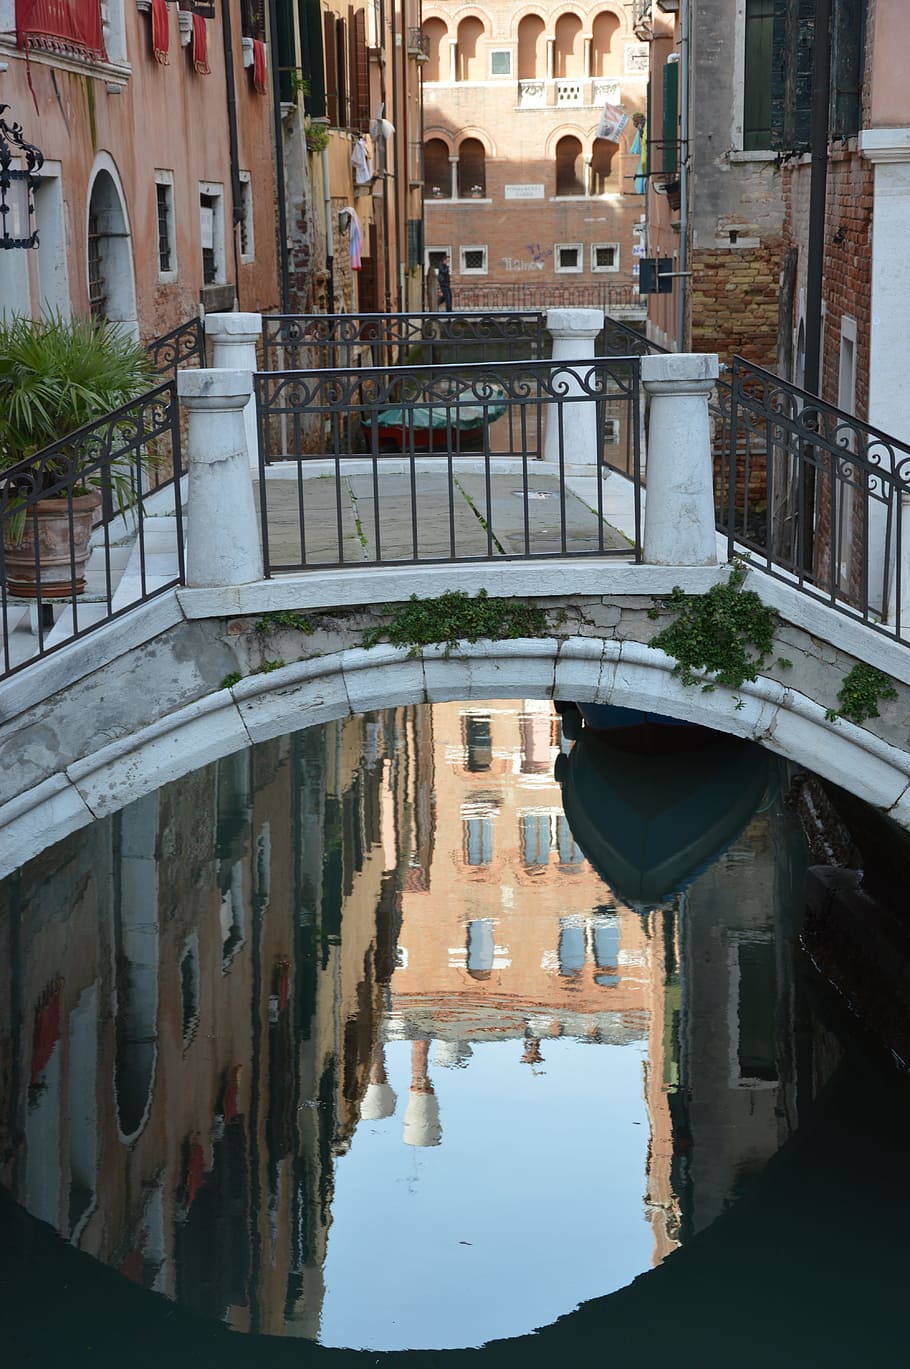 Venice, Channel, Water, Mirroring, water reflection, homes, italy, canal, venice - Italy, architecture